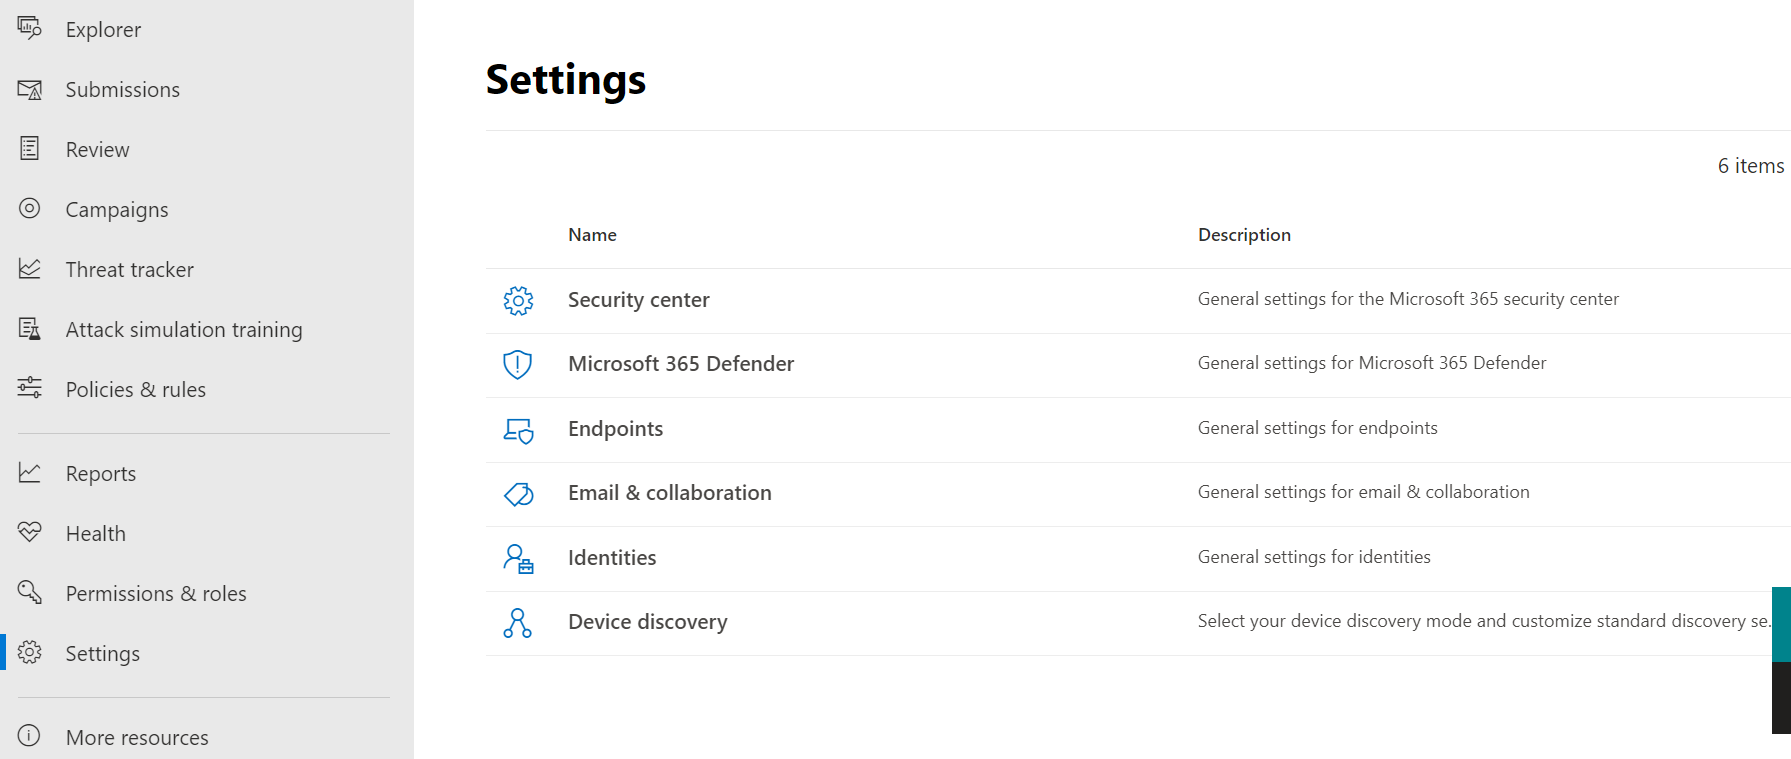 The Setting page of the Microsoft 365 Defender portal